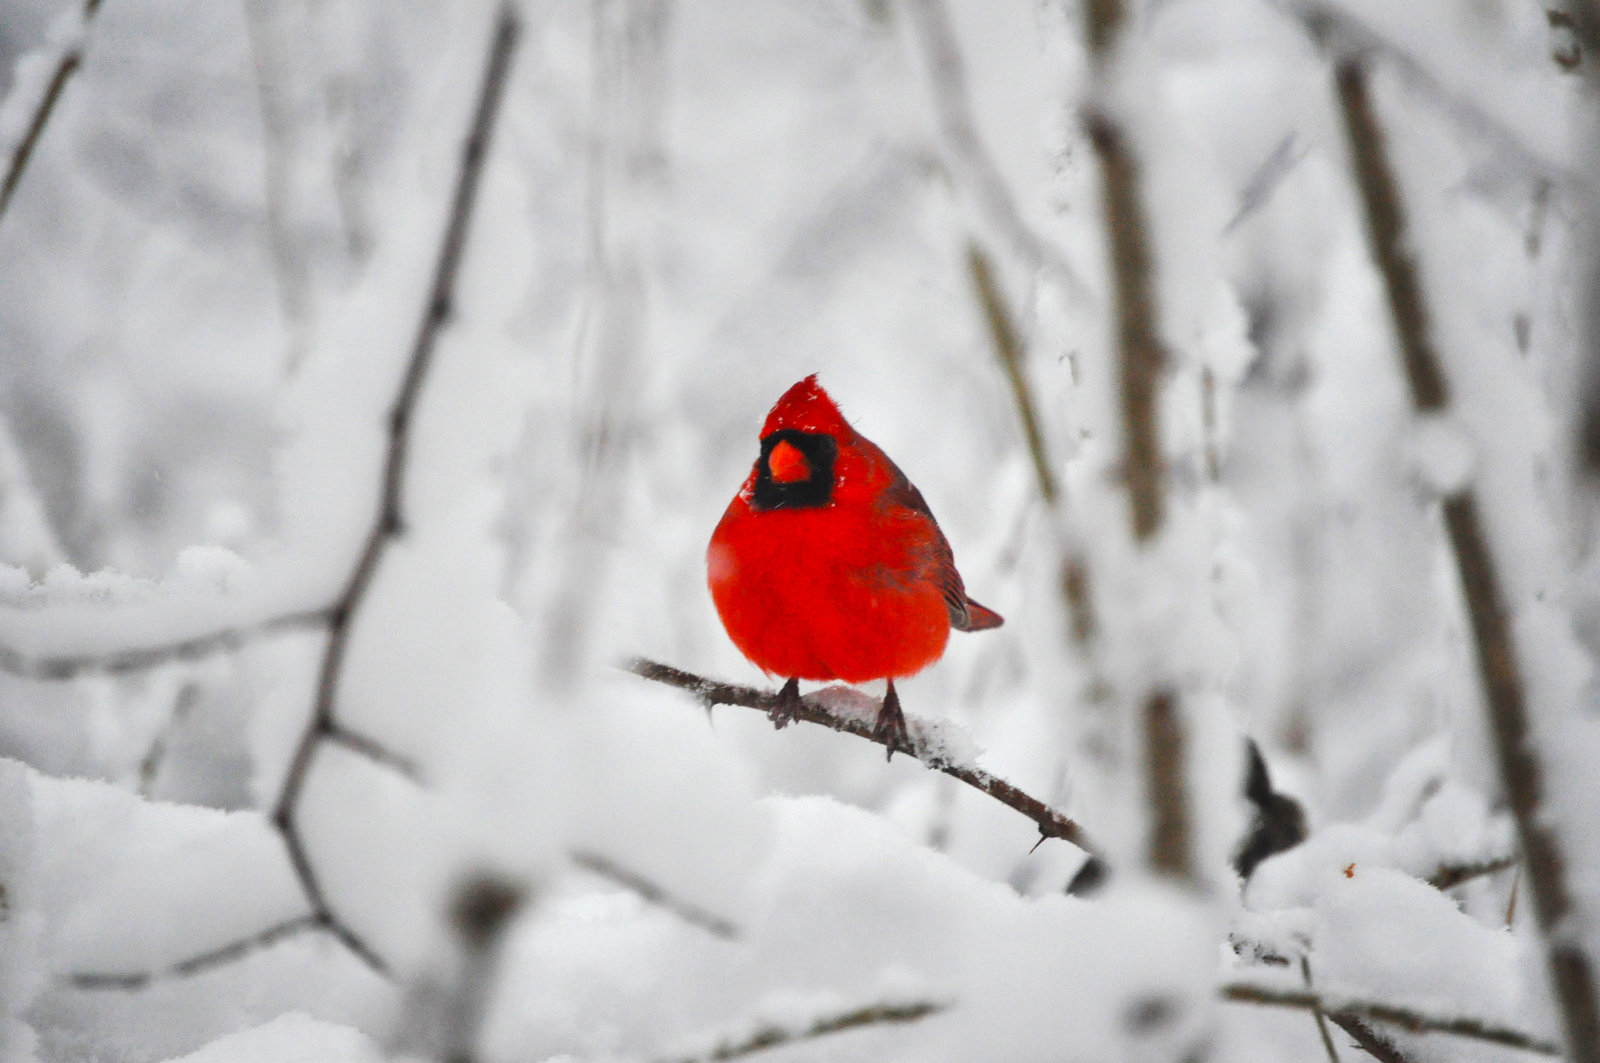 Cardinal In The Snow by YoByAxEs on